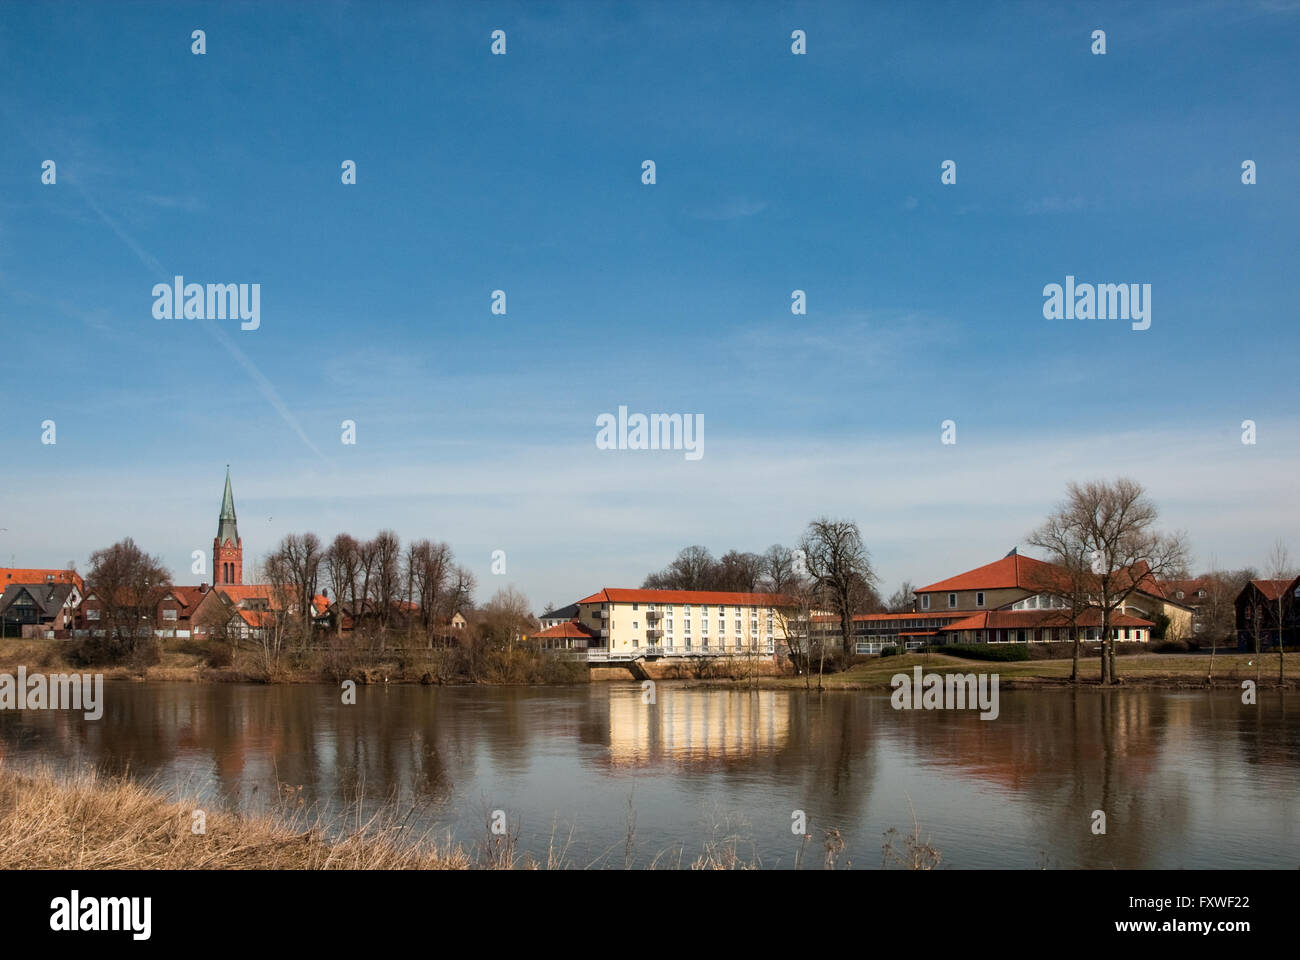 Cityscape of Nienburg with church tower, houses, rampart and Weser seen from the opposite bank of the river Weser Stock Photo